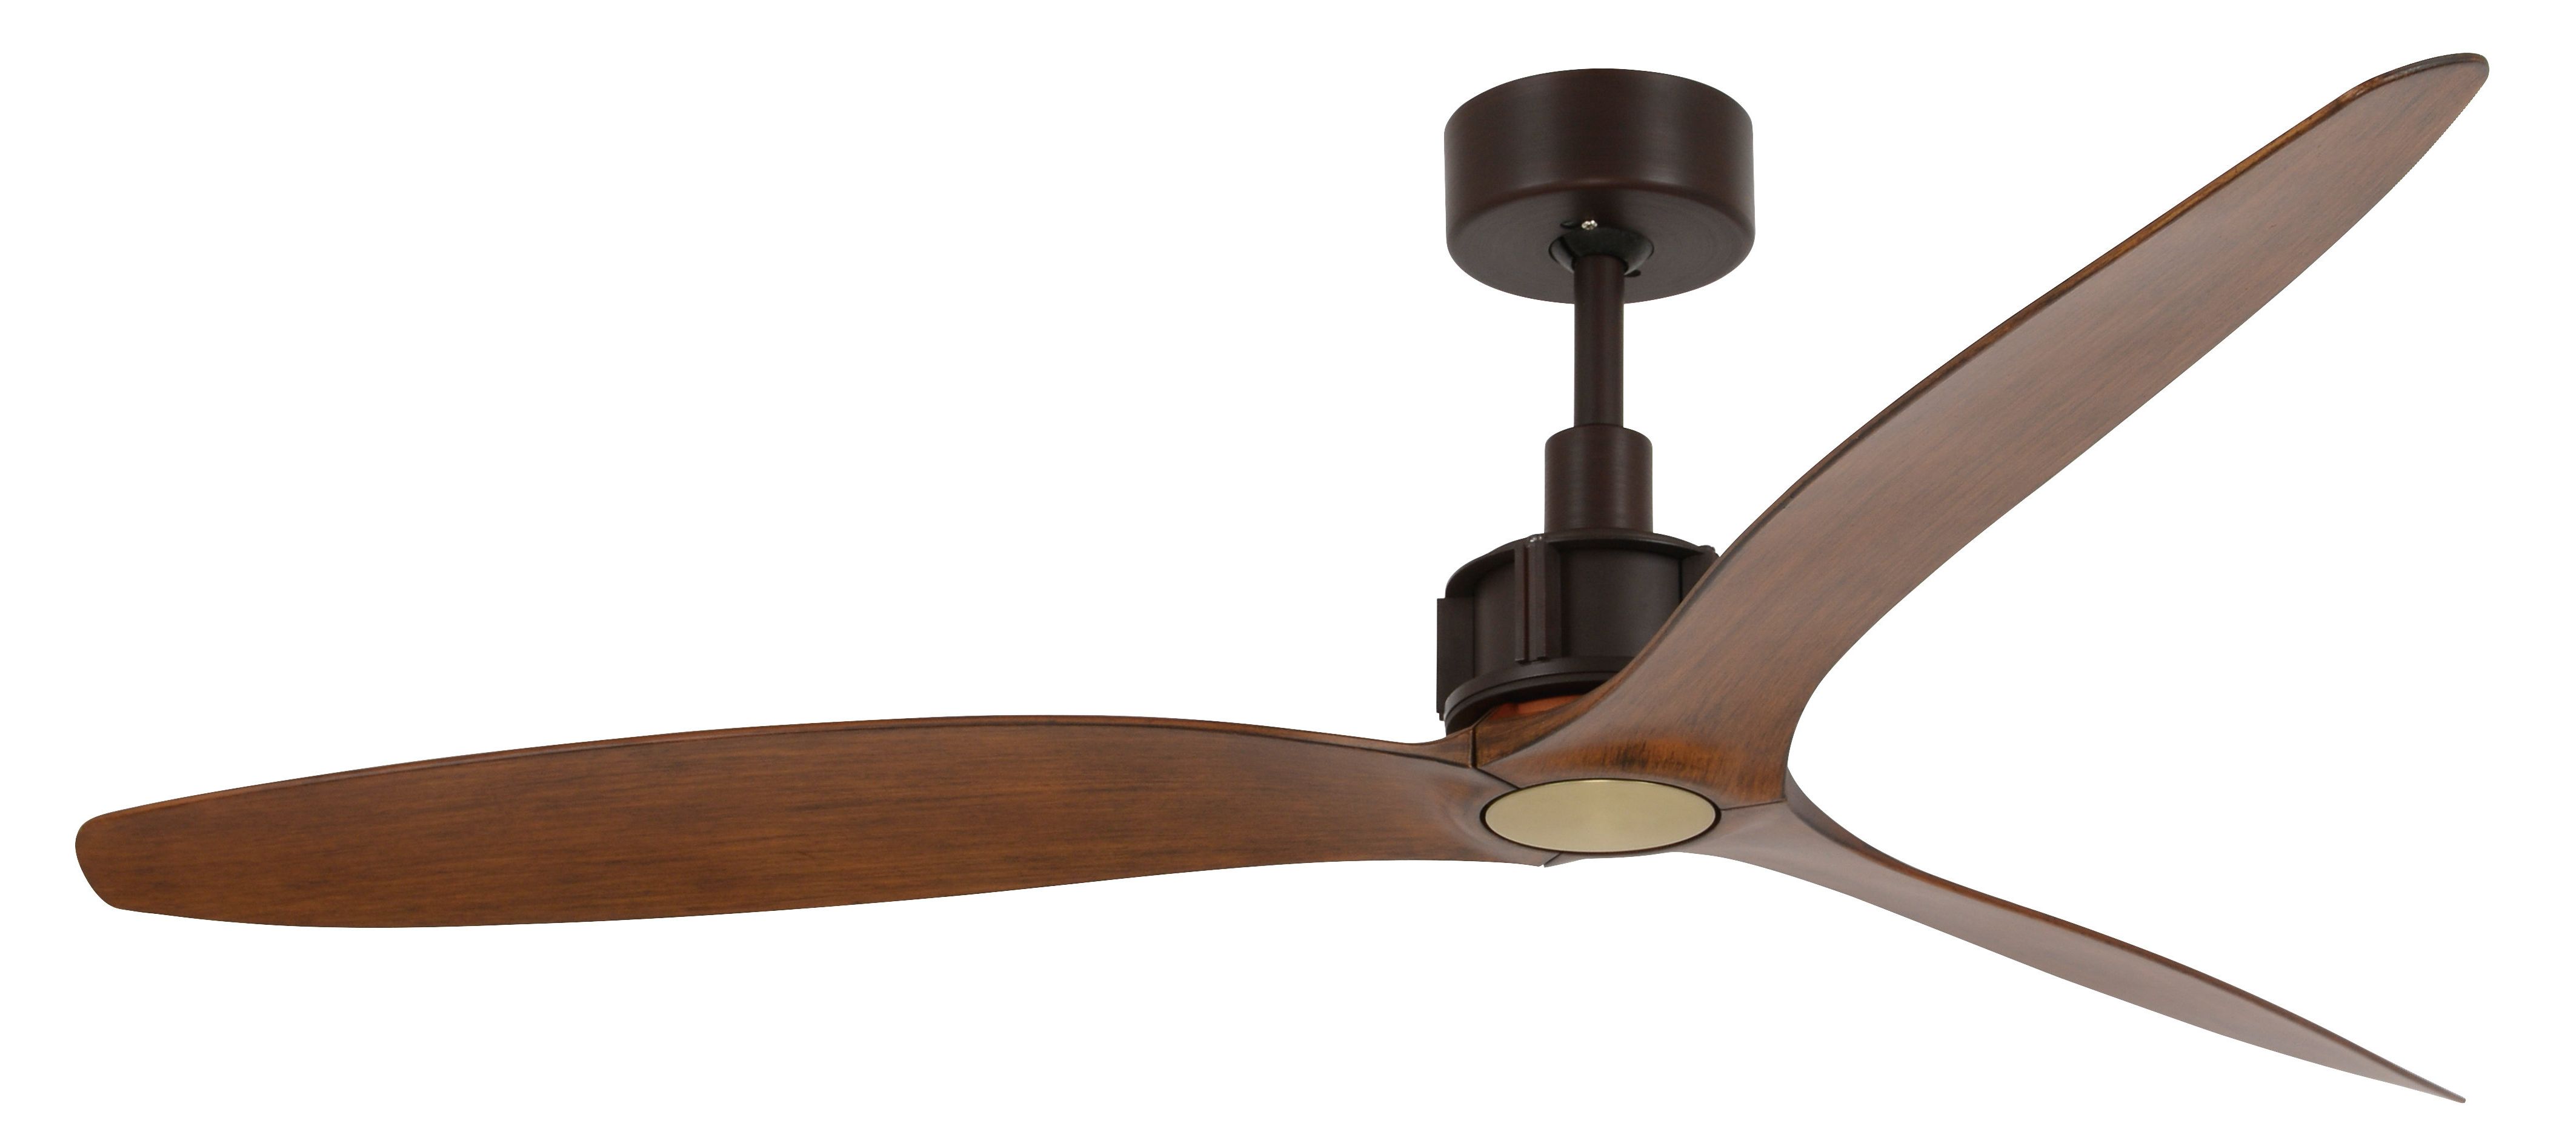 Emil 3 Blade Ceiling Fans Within Recent Modern Rustic Interiors 52" Catoe 3 Blade Ceiling Fan With Remote (View 16 of 20)